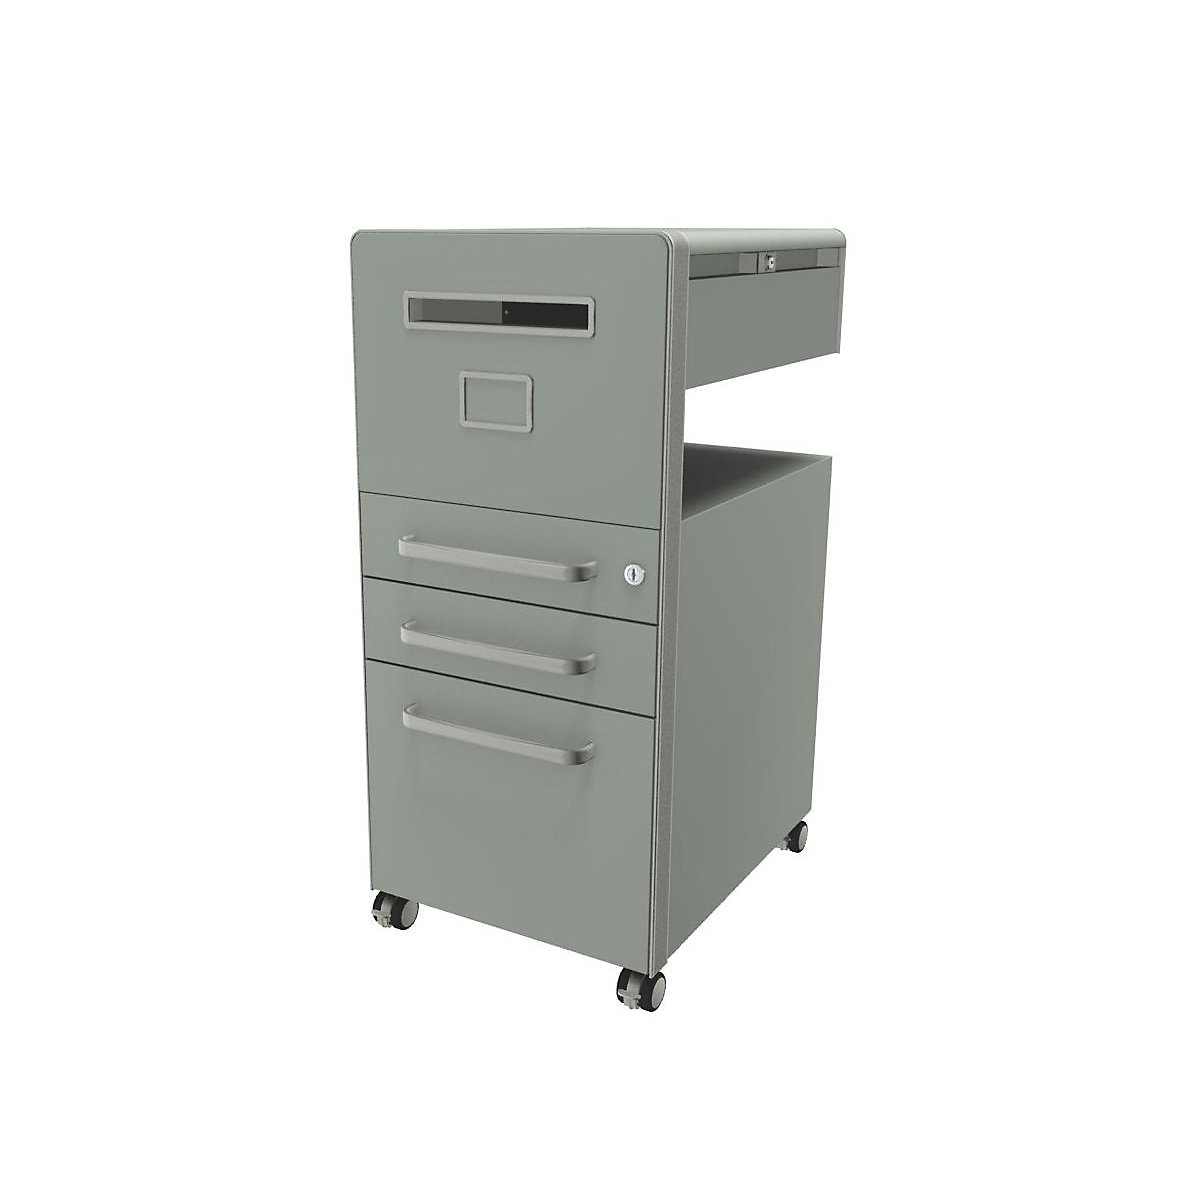 Bite™ pedestal furniture, with 1 whiteboard, opens on the left side – BISLEY, with 2 universal drawers, 1 suspension file drawer, york-21